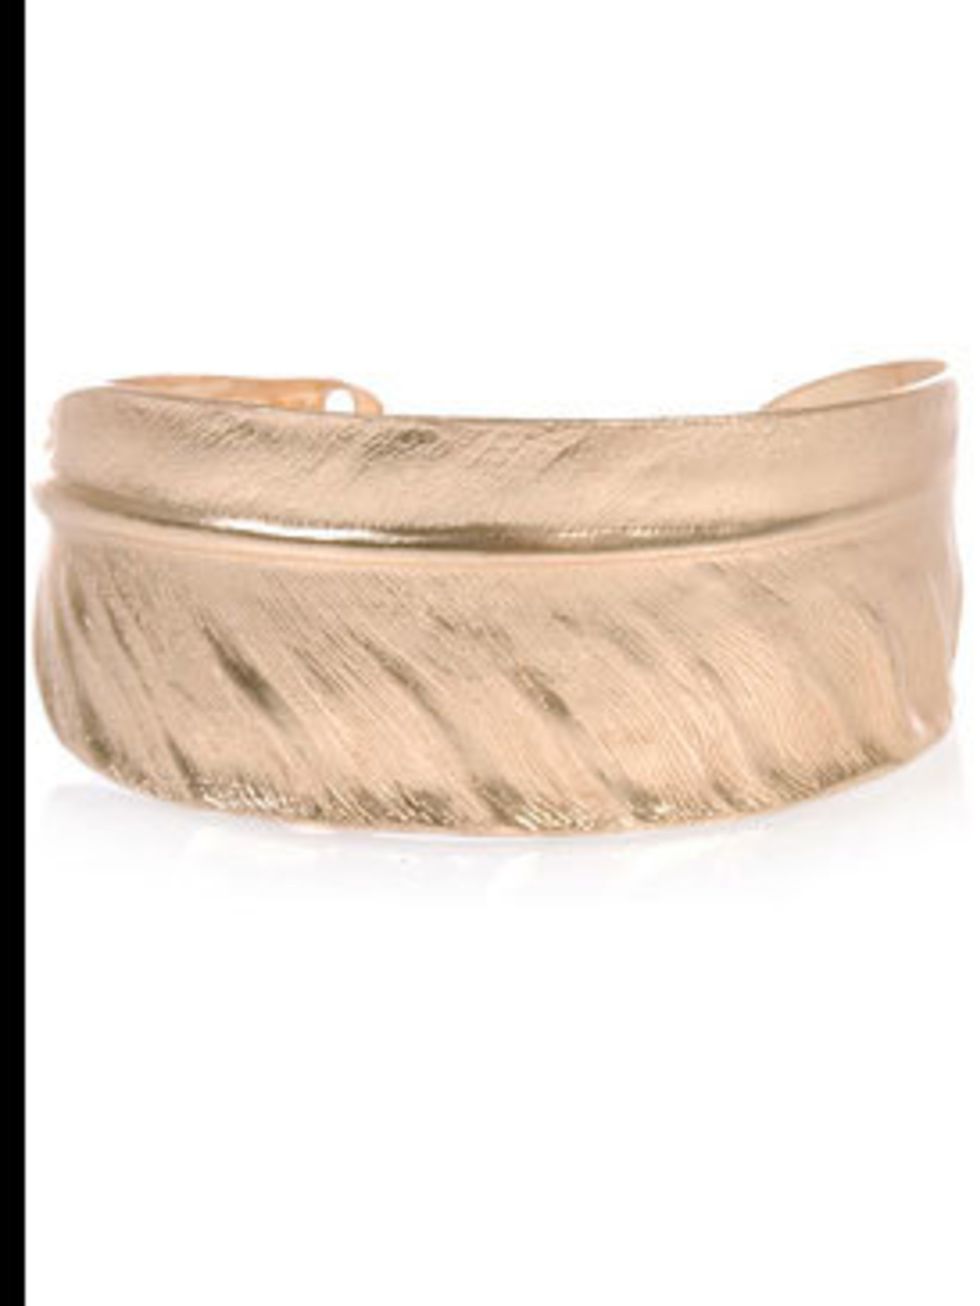 <p>Gold-plated feather cuff, £52, by Sowat at <a href="http://www.farfetch.com/shopping/women/search/item10016539.aspx">Farfetch</a></p>